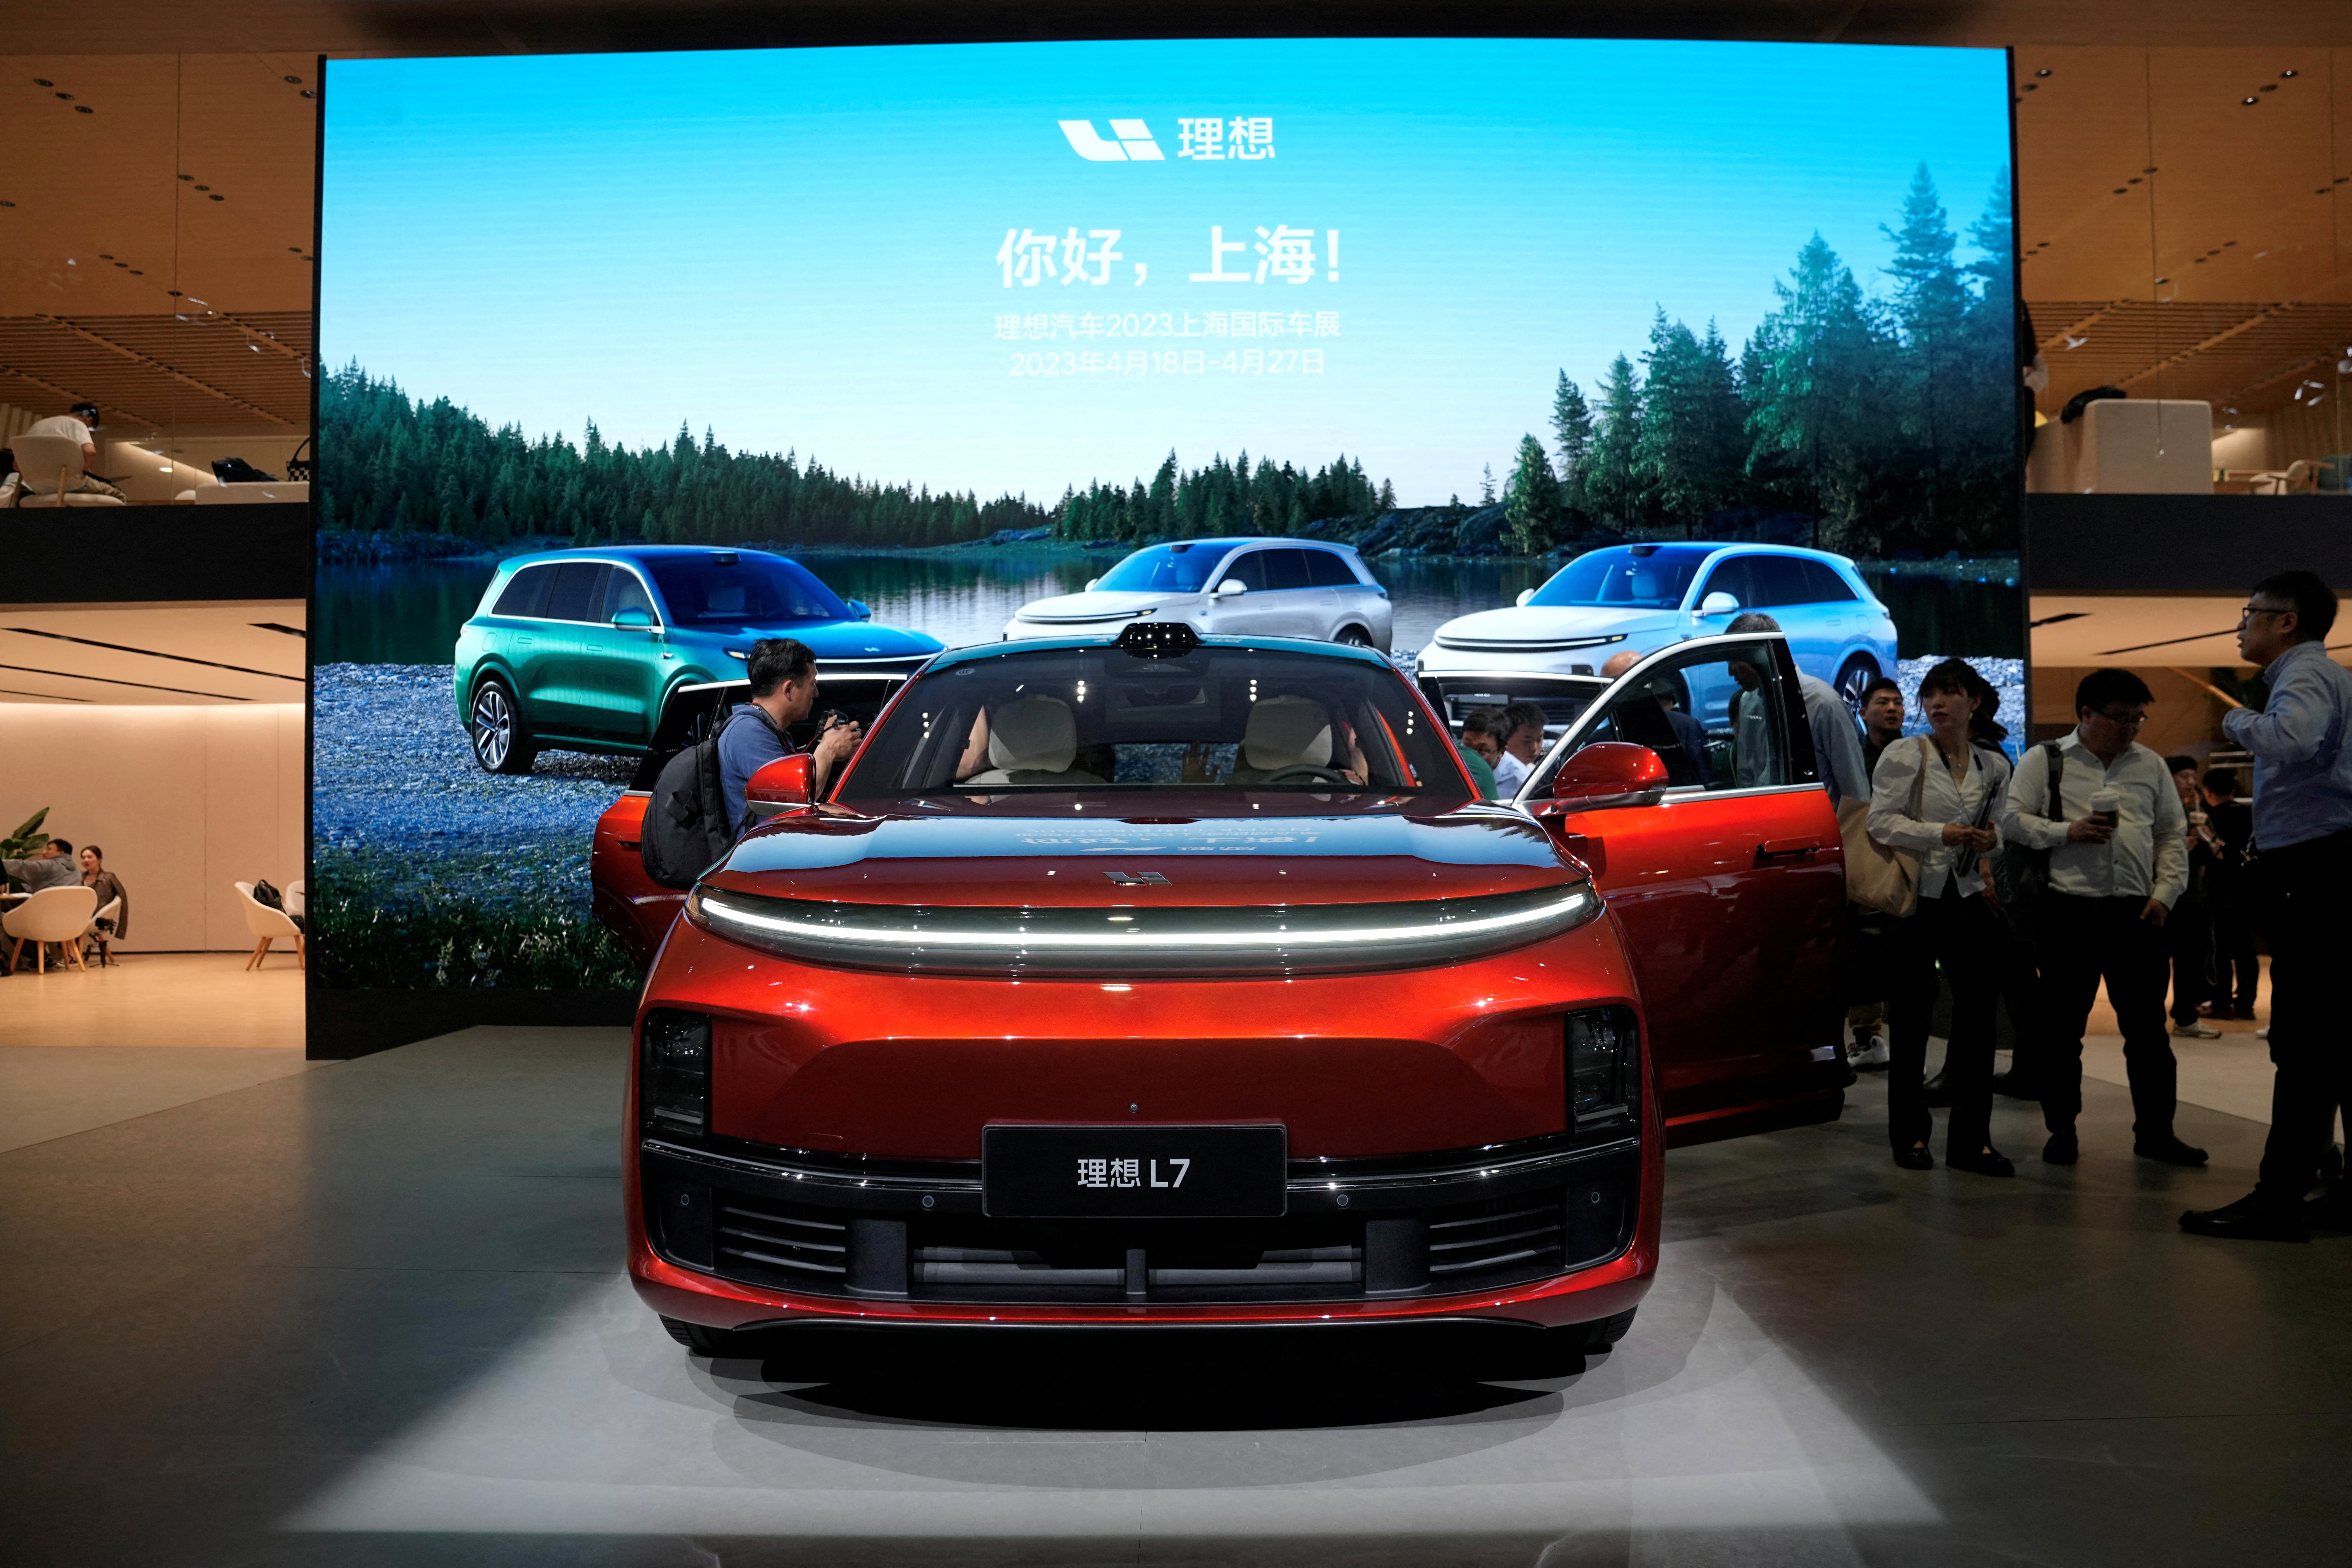 FILE PHOTO: A Li L7 electric SUV by Li Auto is displayed at the Auto Shanghai show, in Shanghai, China April 18, 2023. REUTERS/Aly Song/File Photo